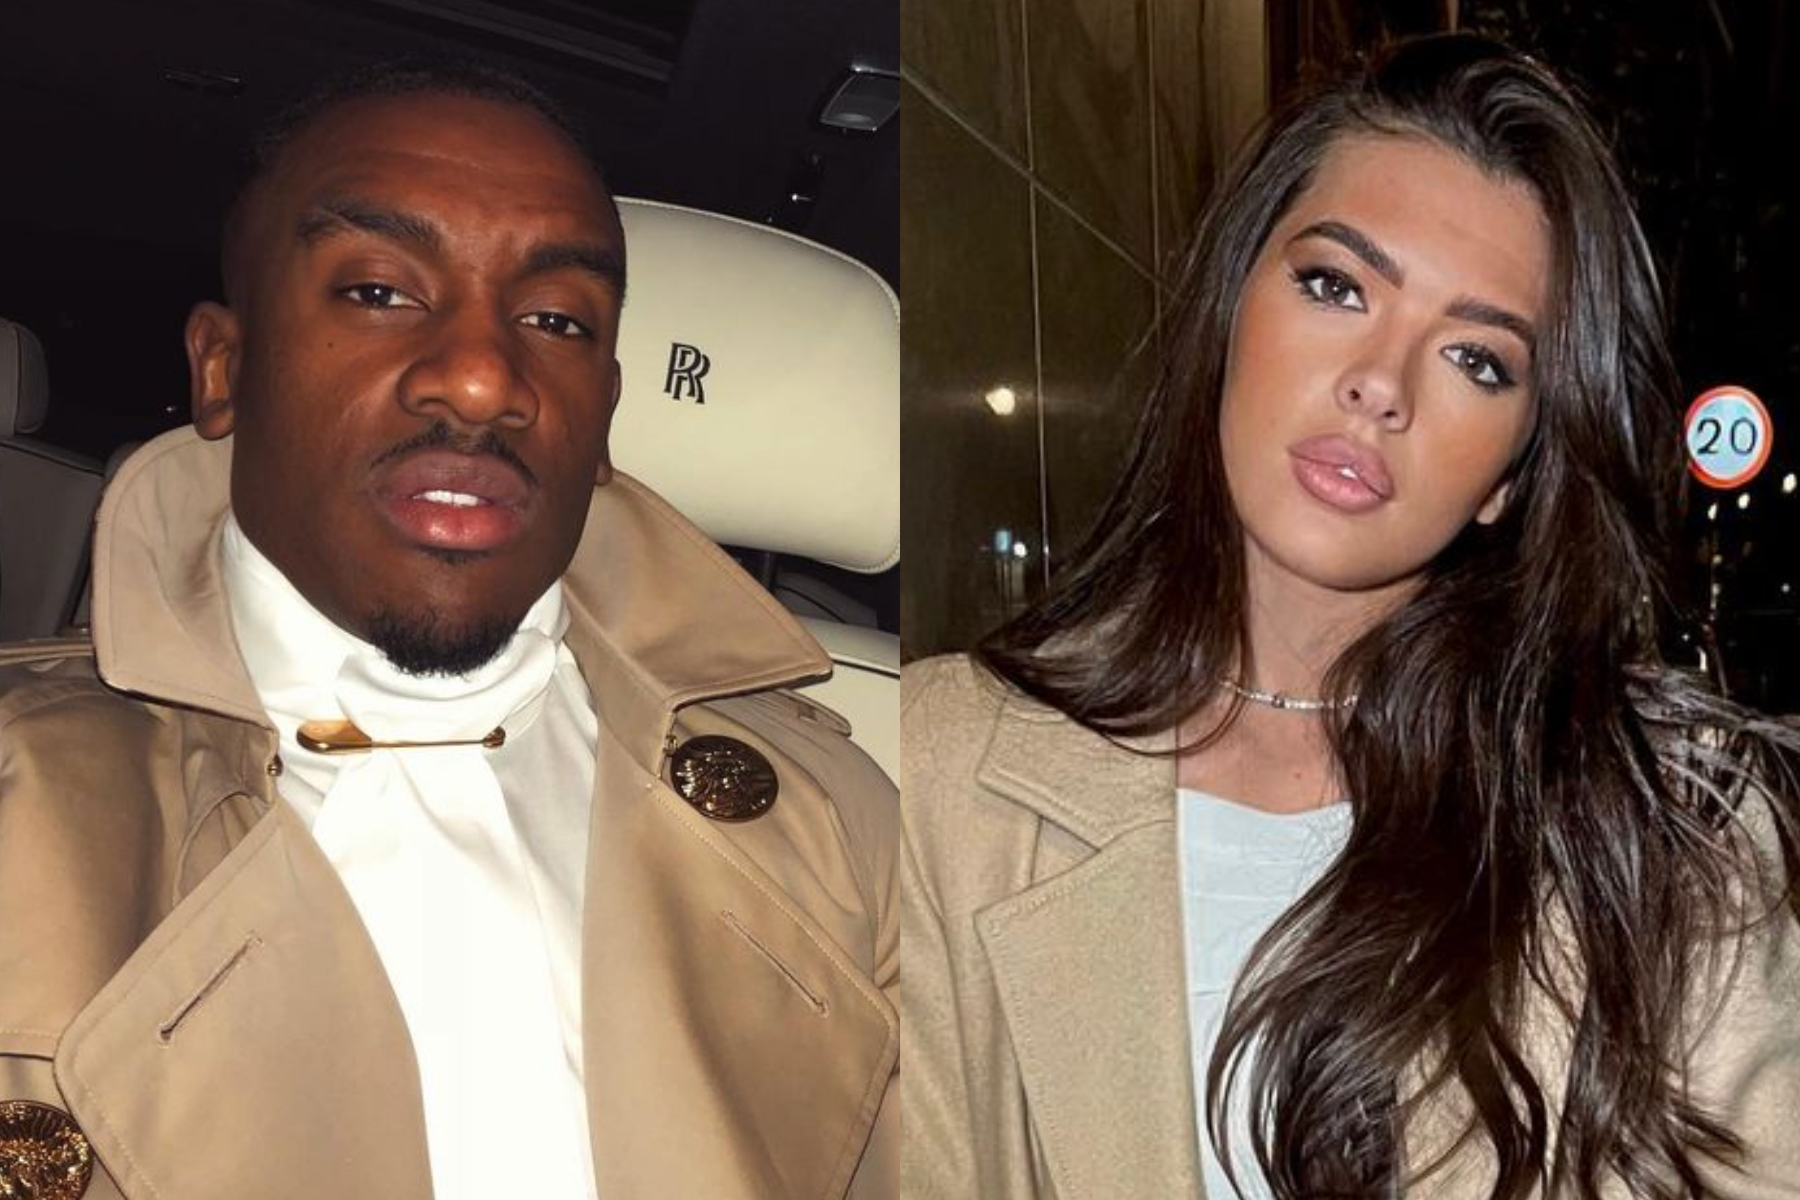 Bugzy Malone, 32, responds to claims he's dating Love Island's